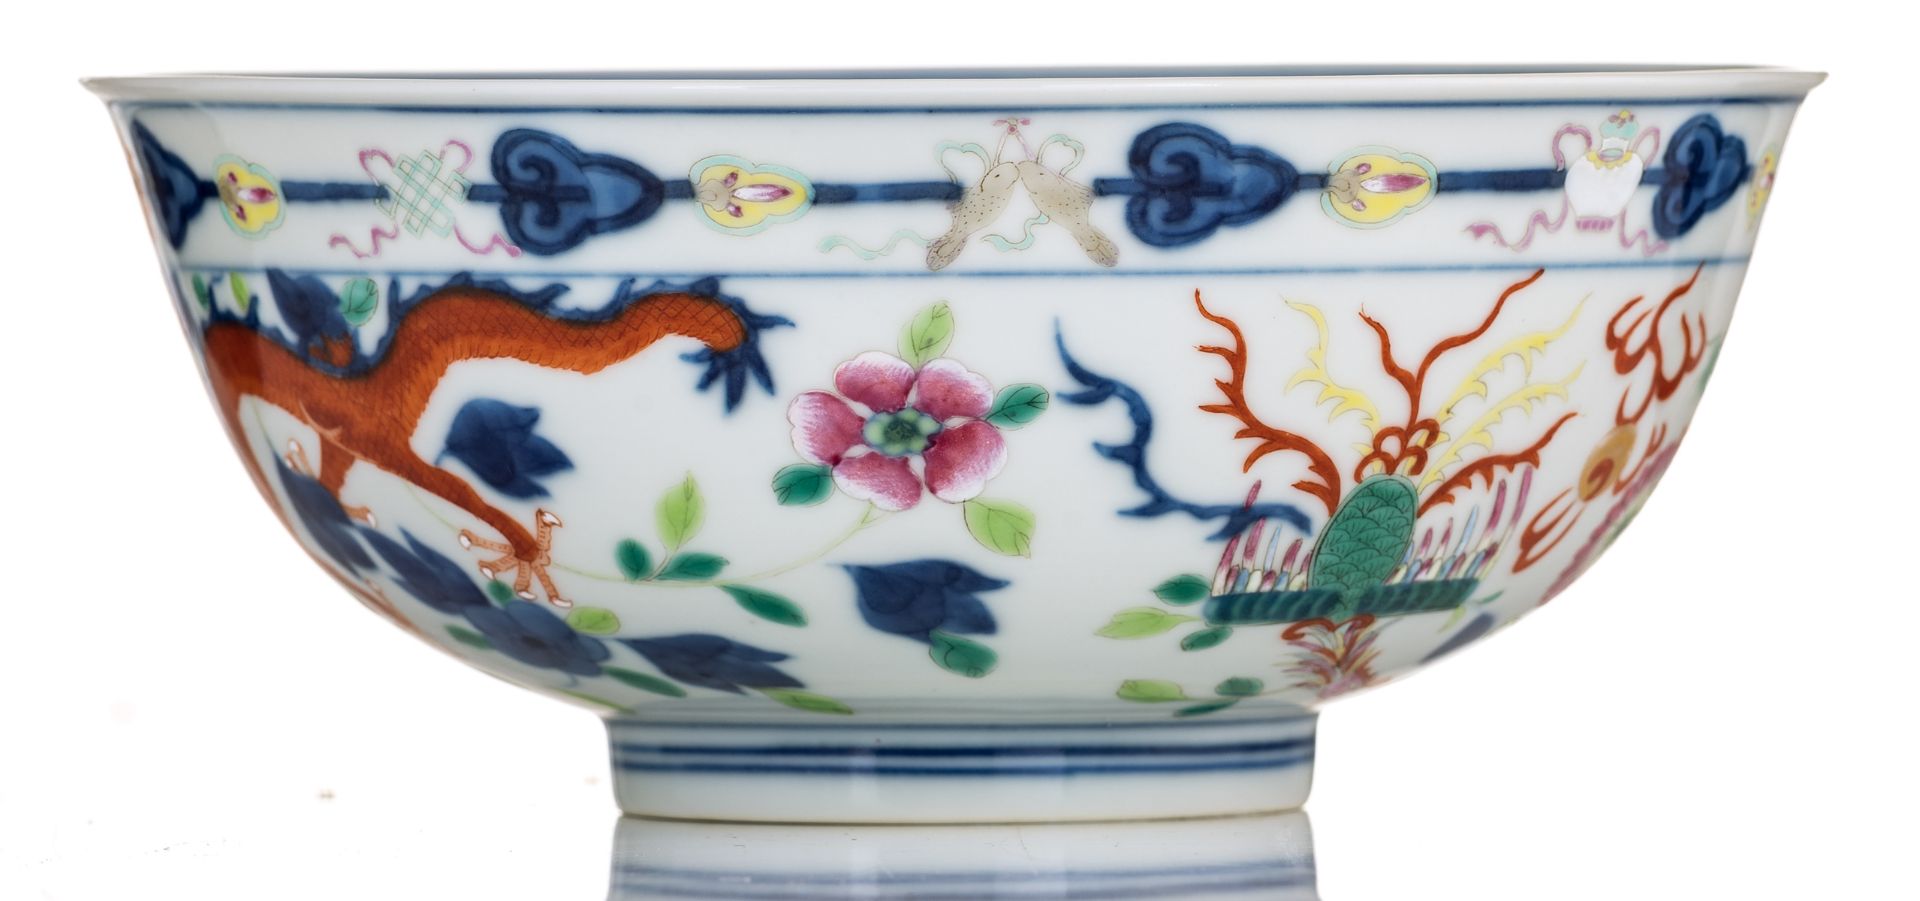 A Chinese polychrome bowl, decorated with flowers and dragons, chasing the flaming pearl, with a Ton - Bild 5 aus 7